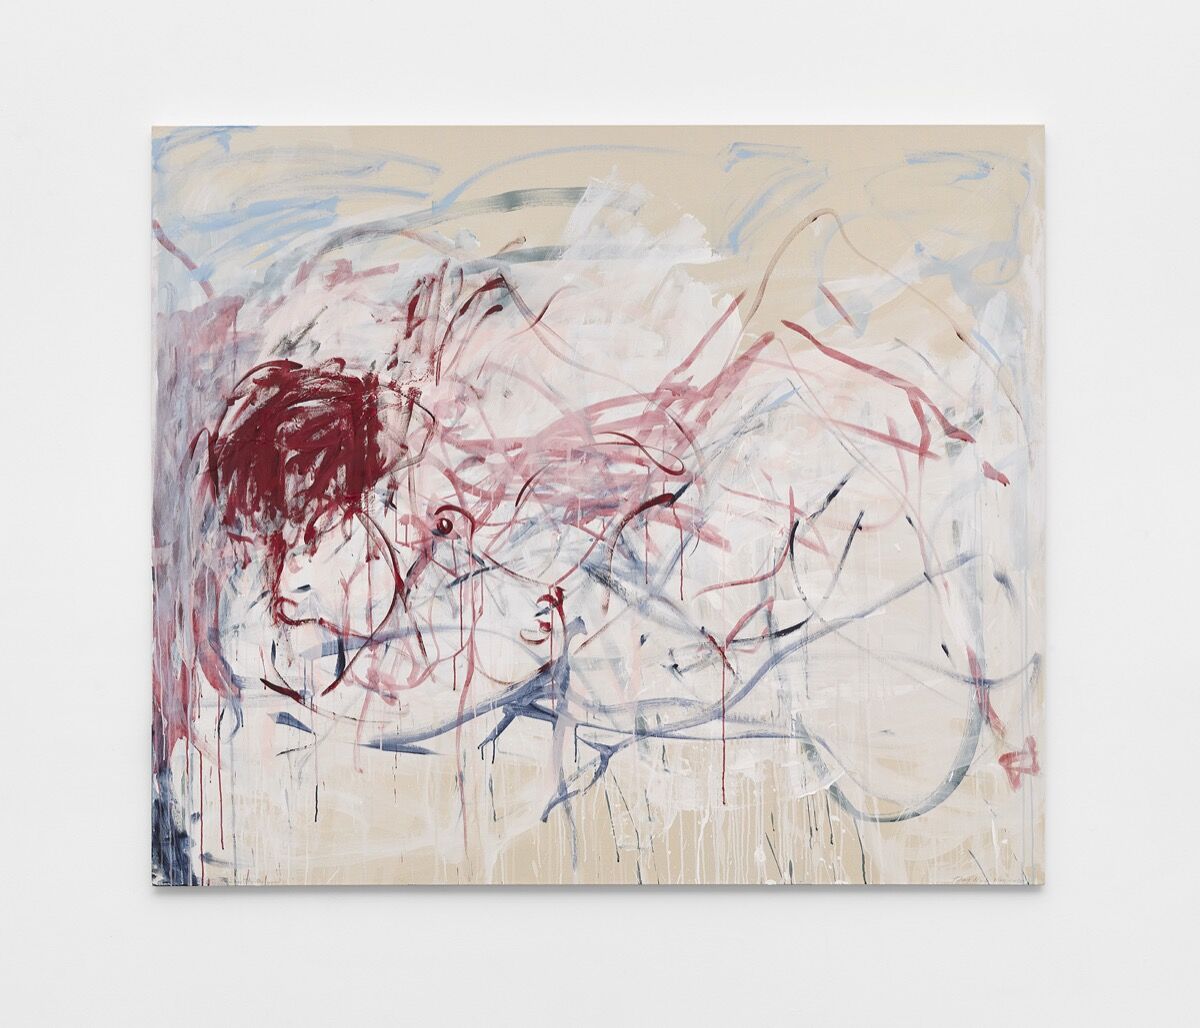 Tracey Emin, This Was The Beginning, 2020. © Tracey Emin. All rights reserved, DACS 2020. Photo © White Cube. Photo by Theo Christelis. Courtesy of the artist and White Cube.